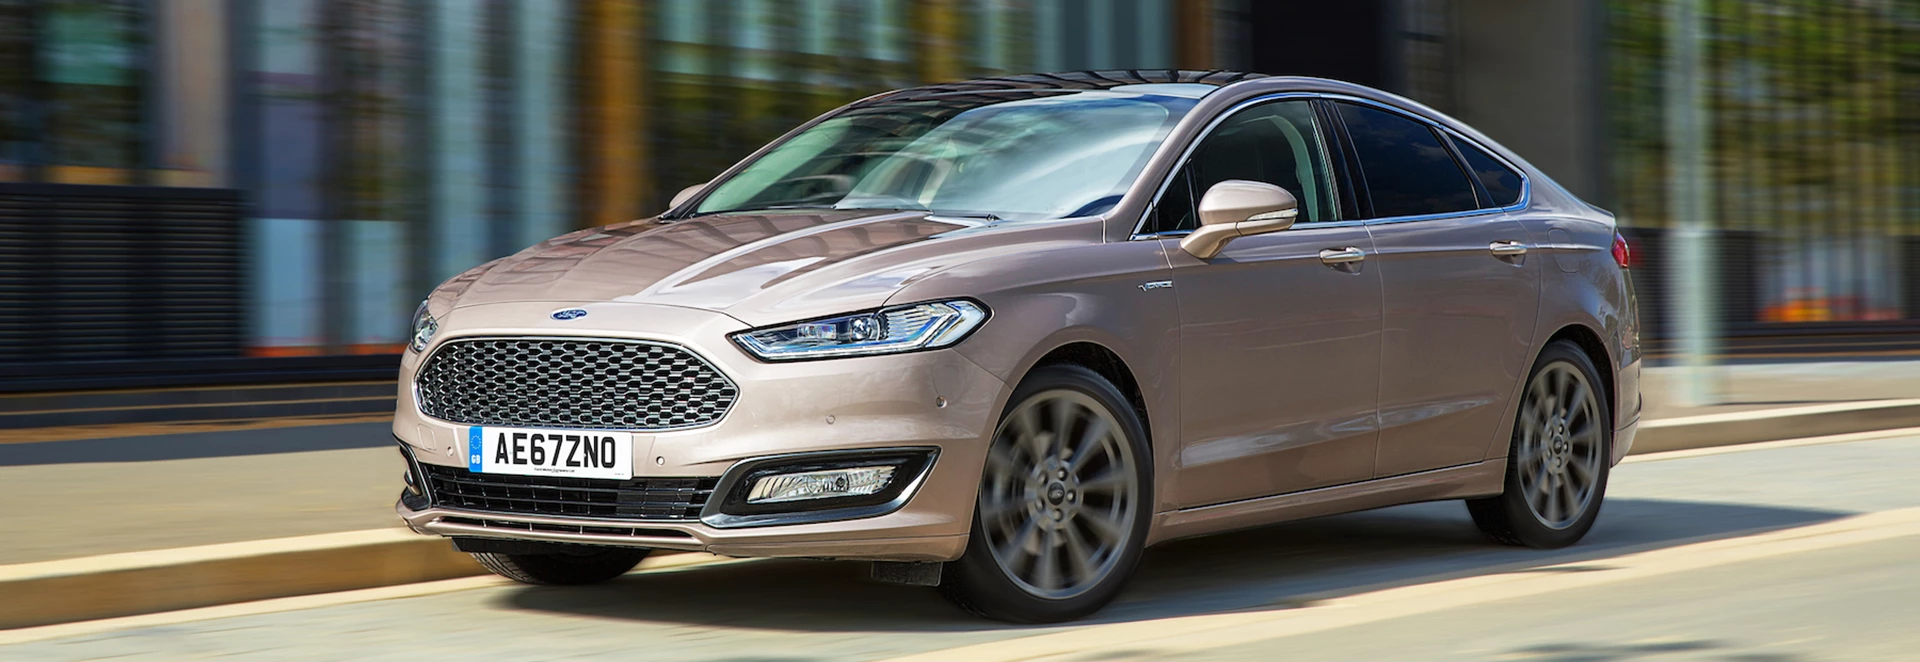 2018 Ford Mondeo range sees prices cut by up to £3000 